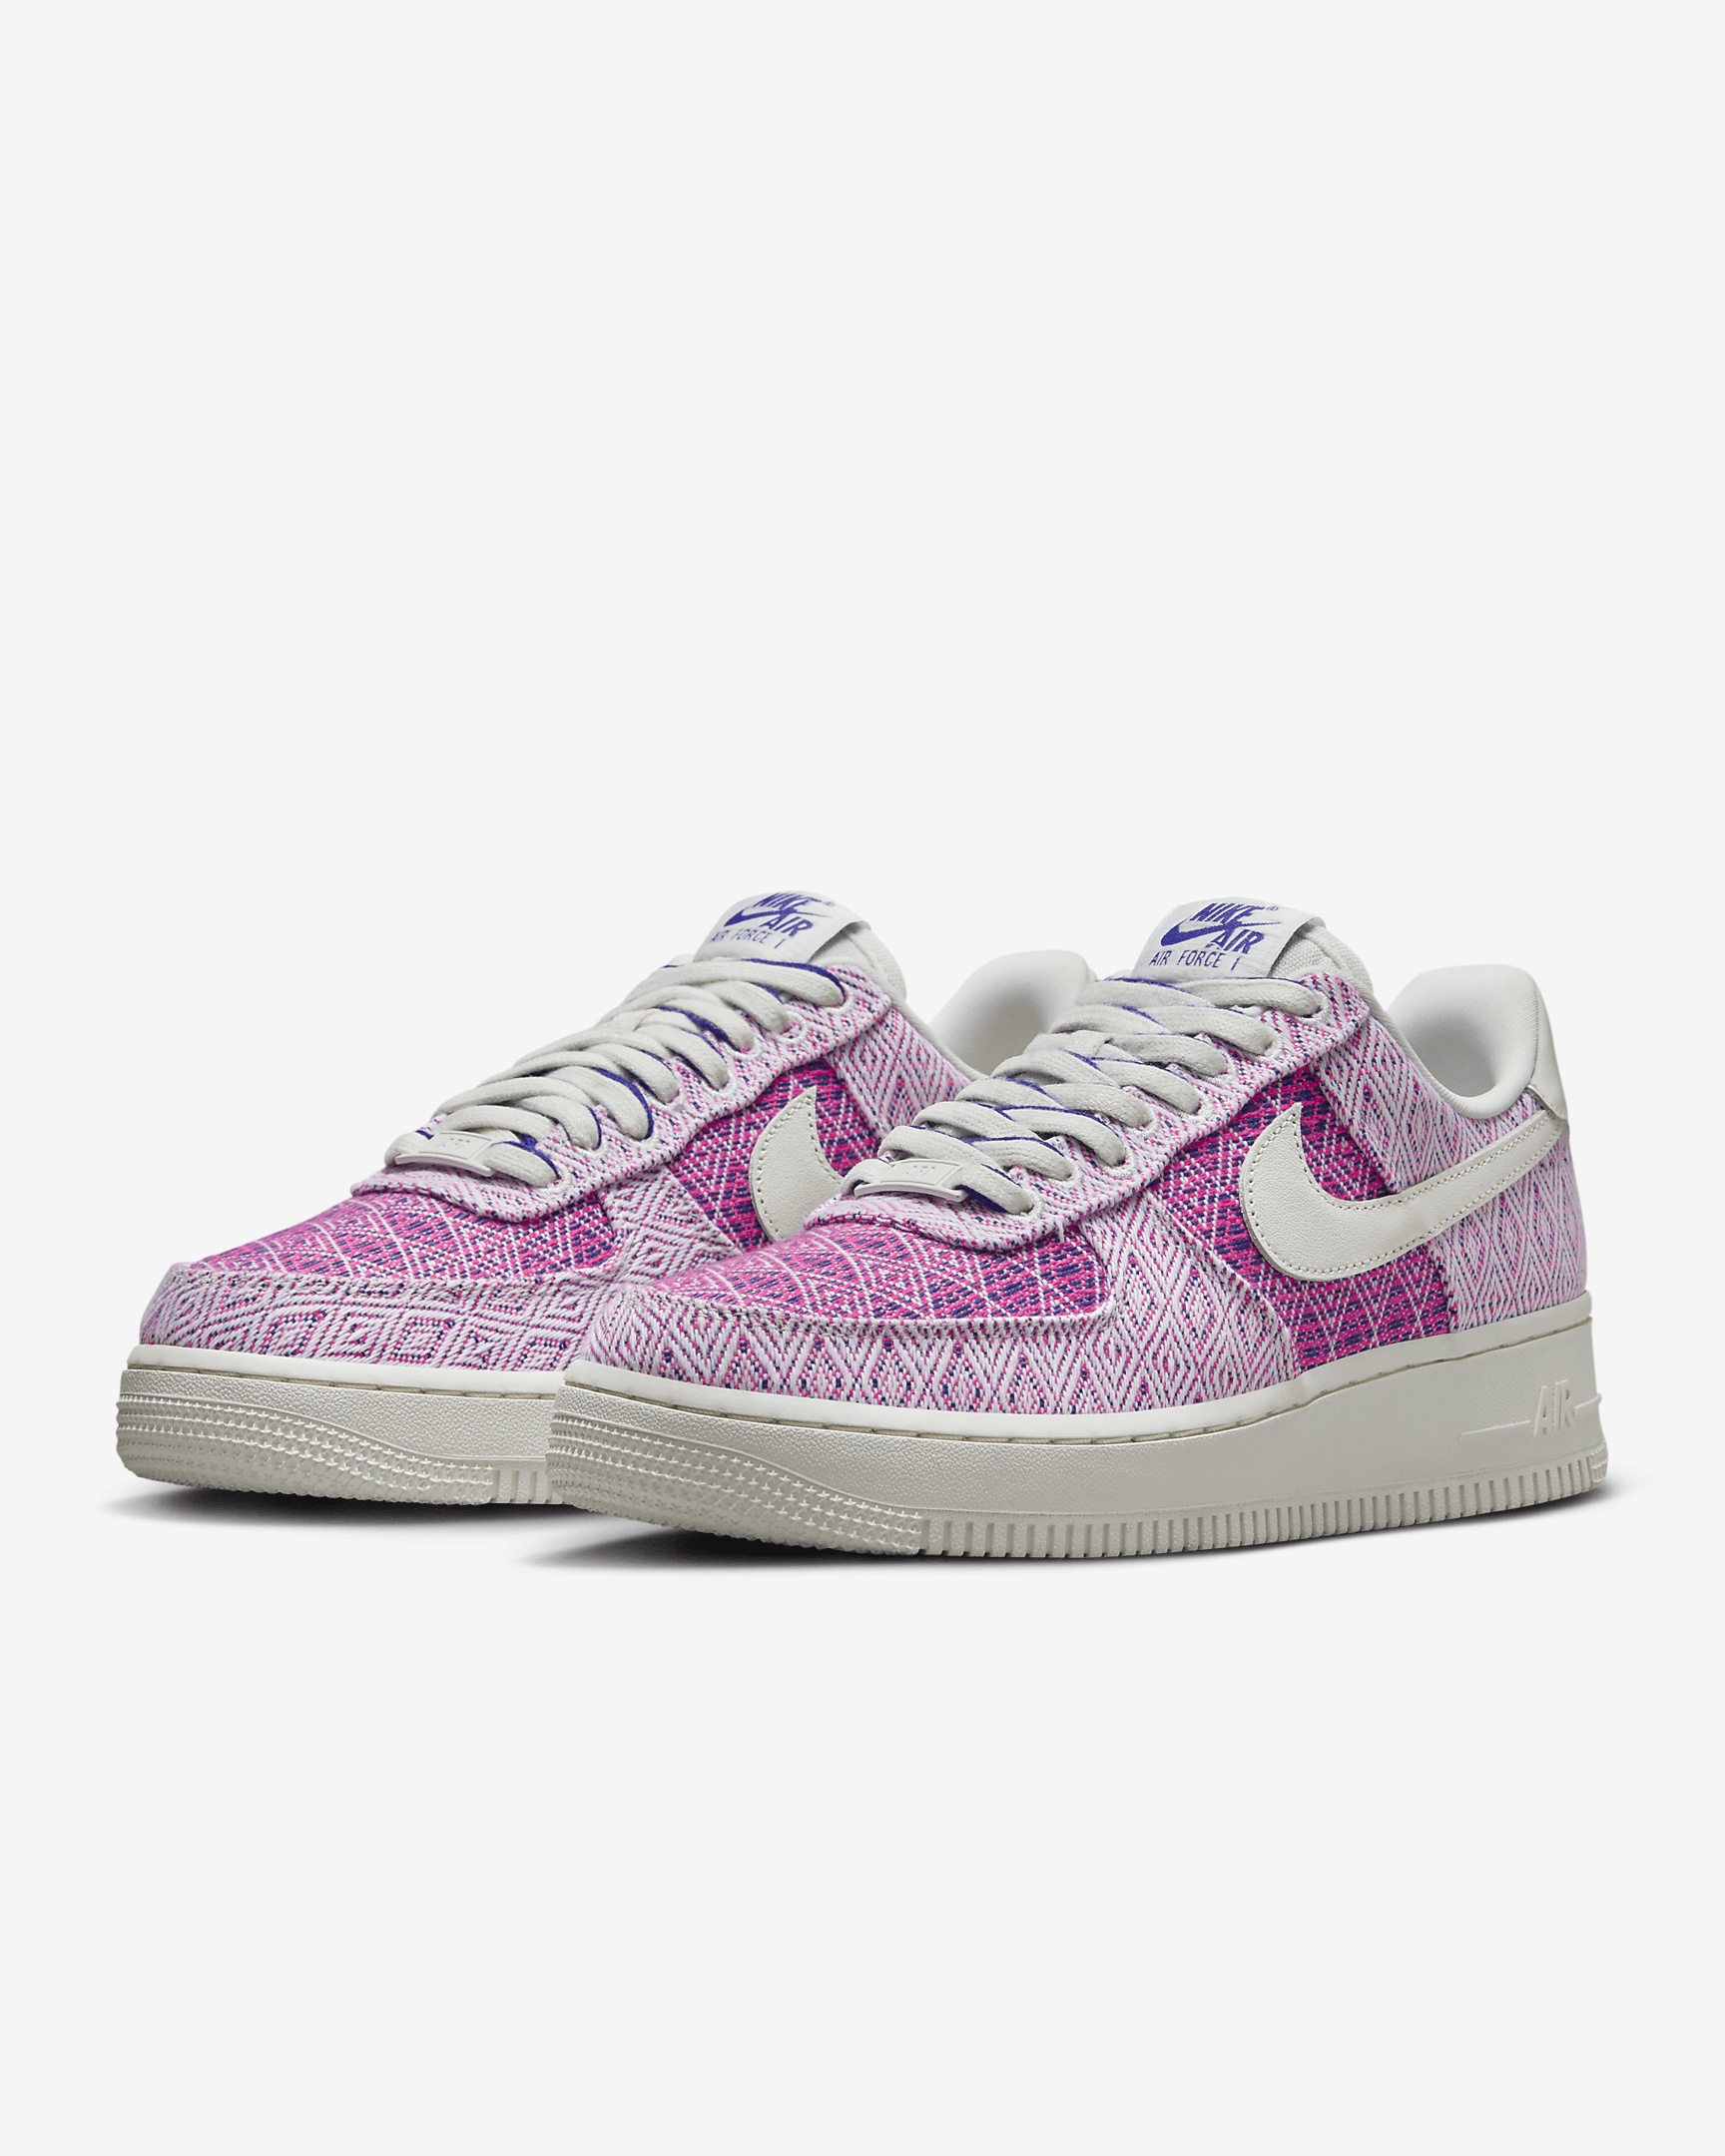 Nike Women's Air Force 1 '07 Shoes - 5